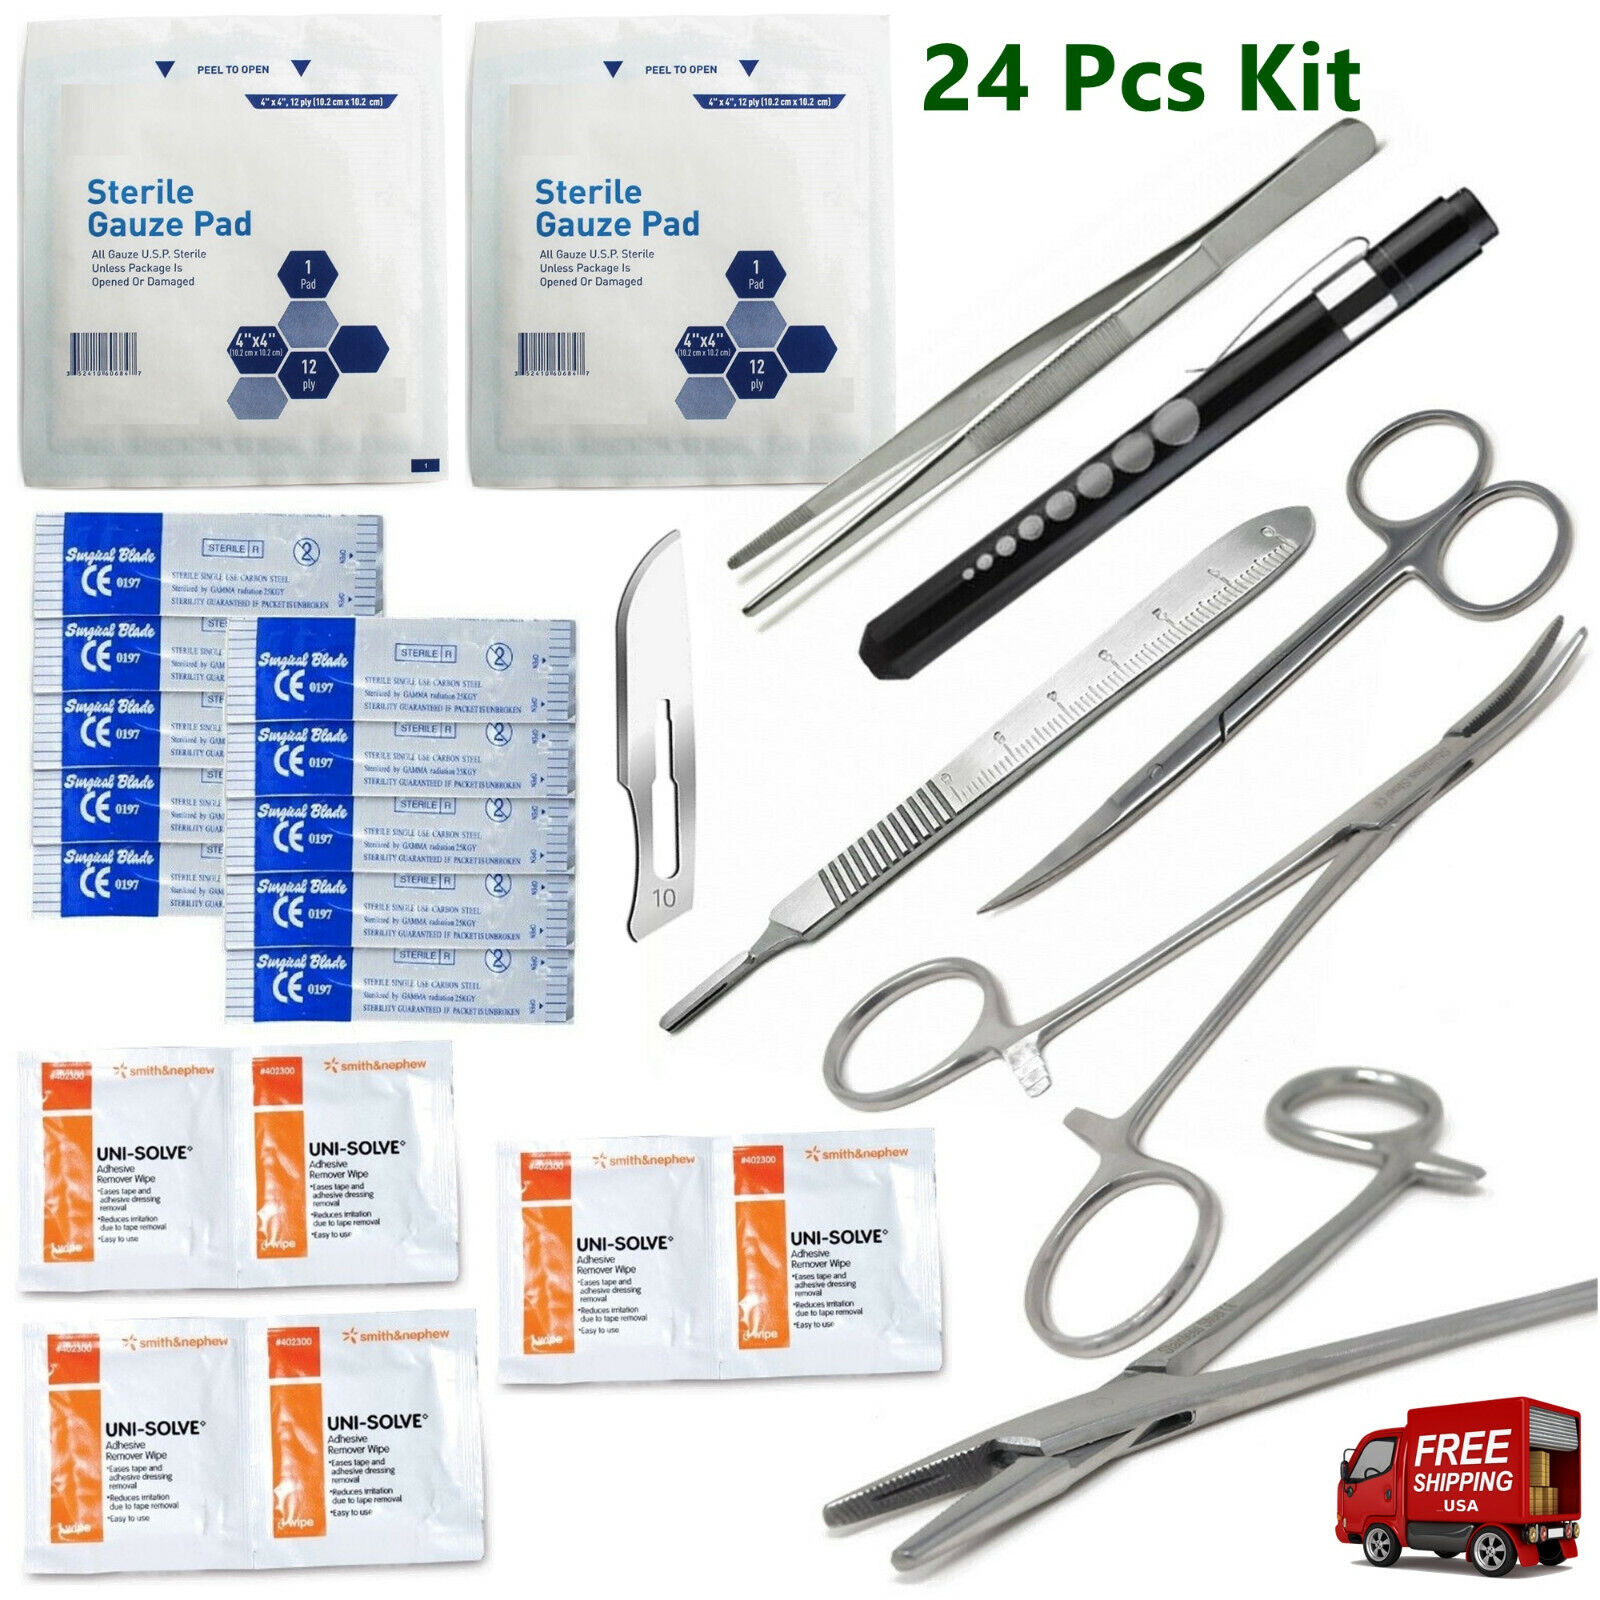 Military Surgical Suture Kit, Suture Set With Scalpel, 24 Piece Kit hti brand Does Not Aaply - фотография #8